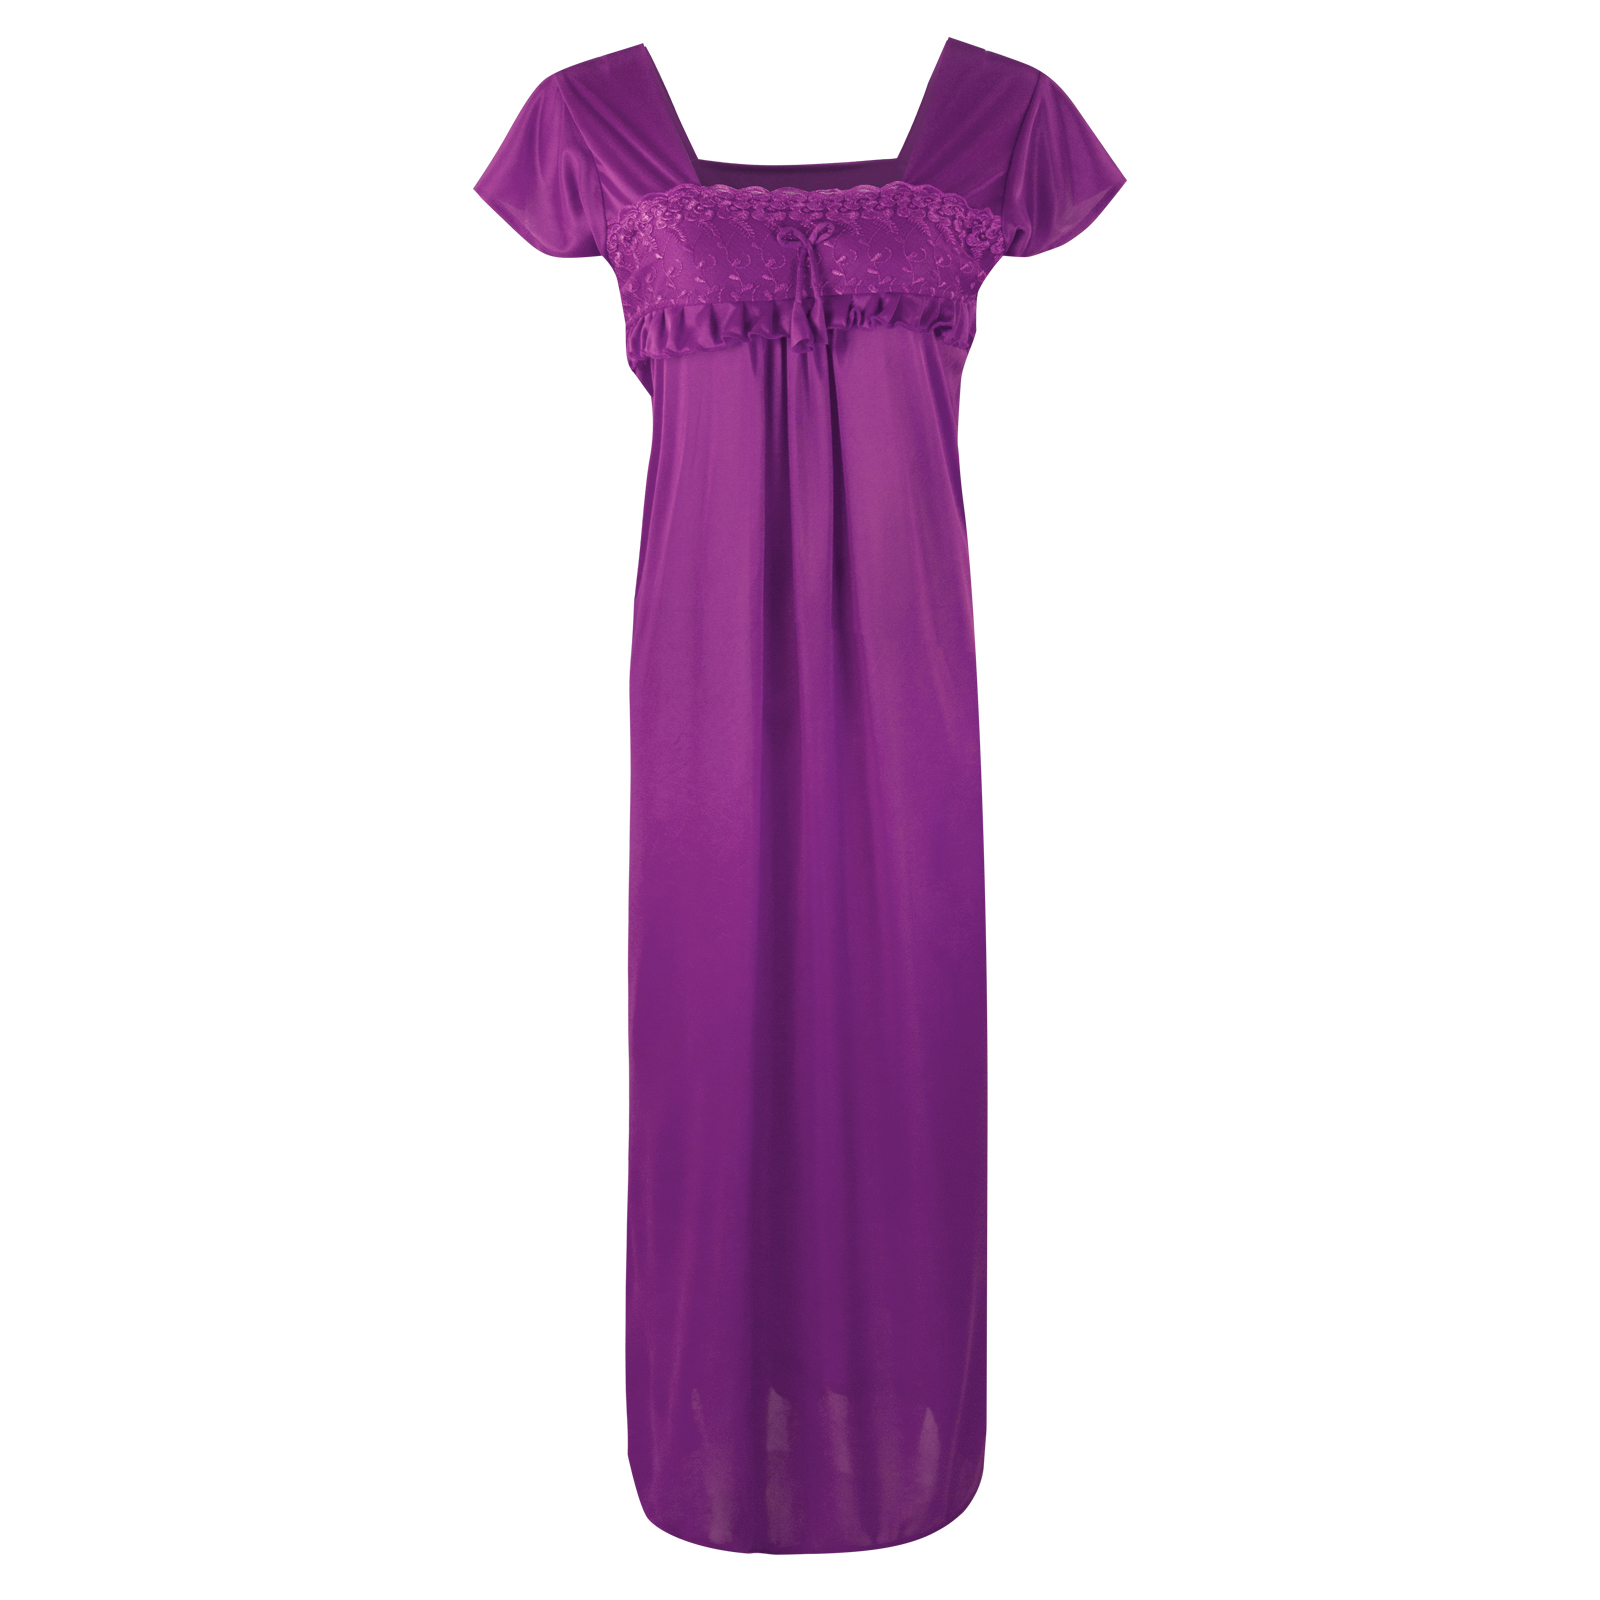 Purple / One Size NEW WOMEN SATIN LONG NIGHTDRESS LADIES NIGHTY CHEMISE EMBROIDERY The Orange Tags